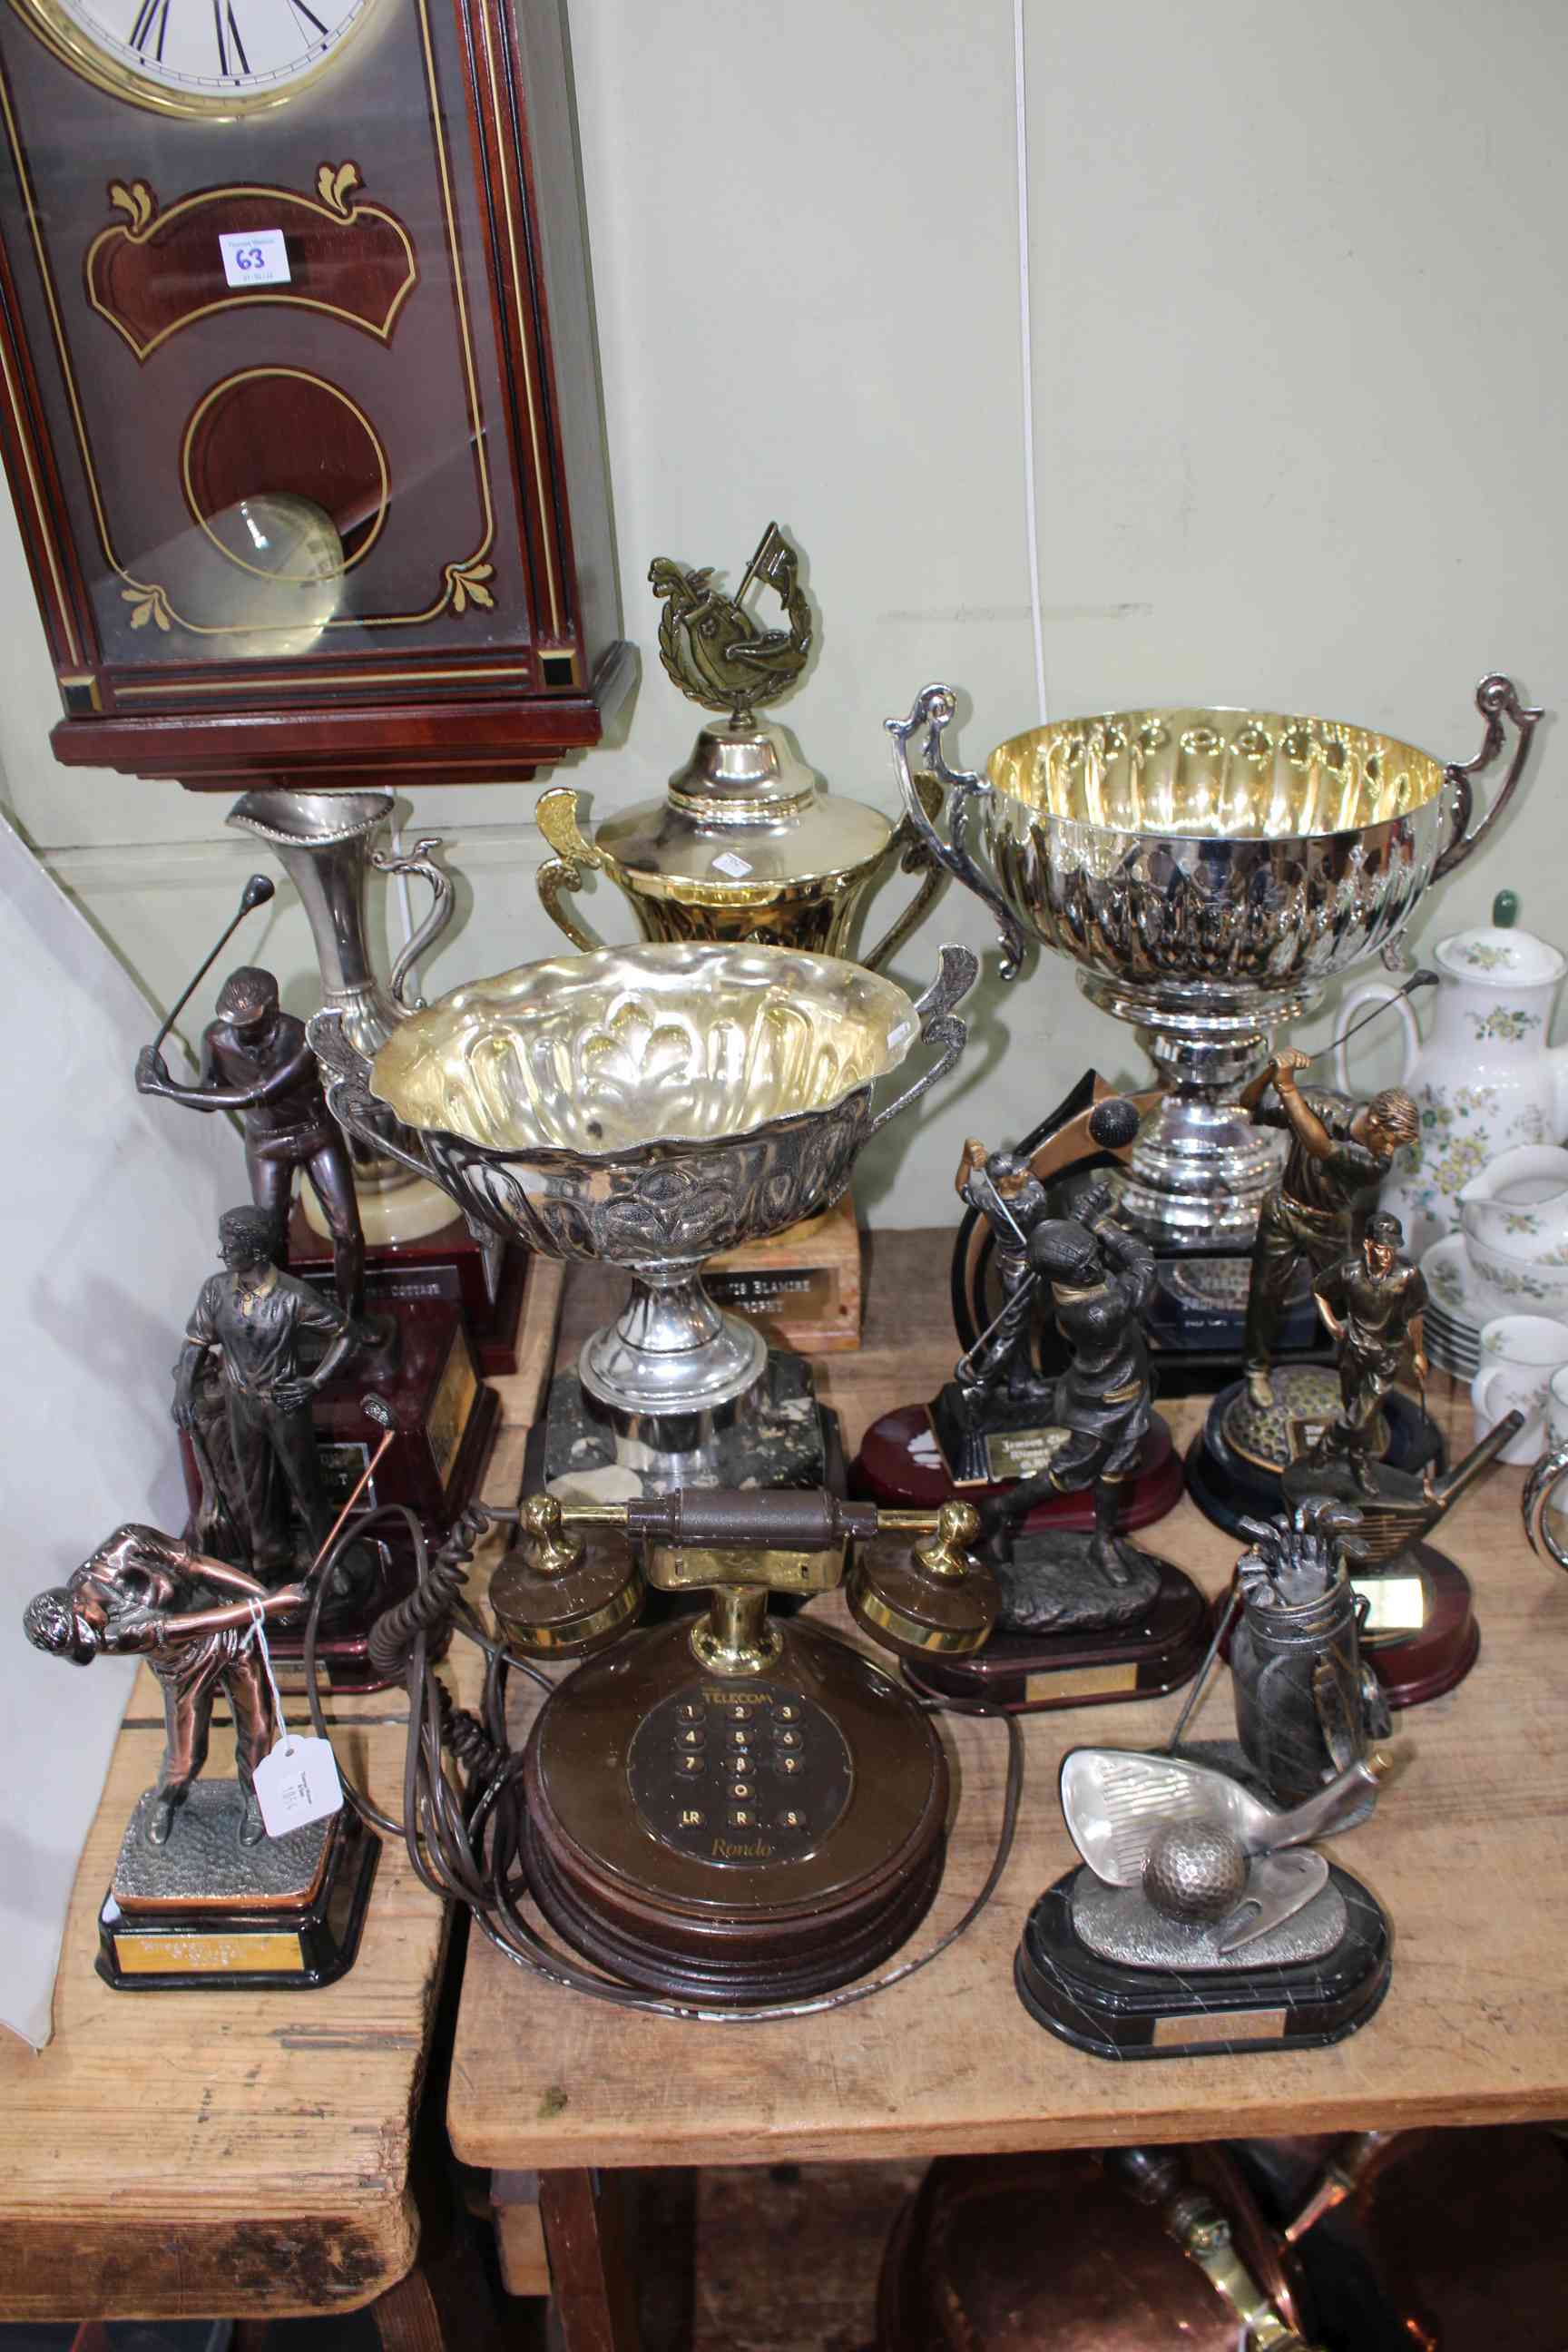 Collection of golf trophies and cups, together with vintage Rondo telephone and wall clock.